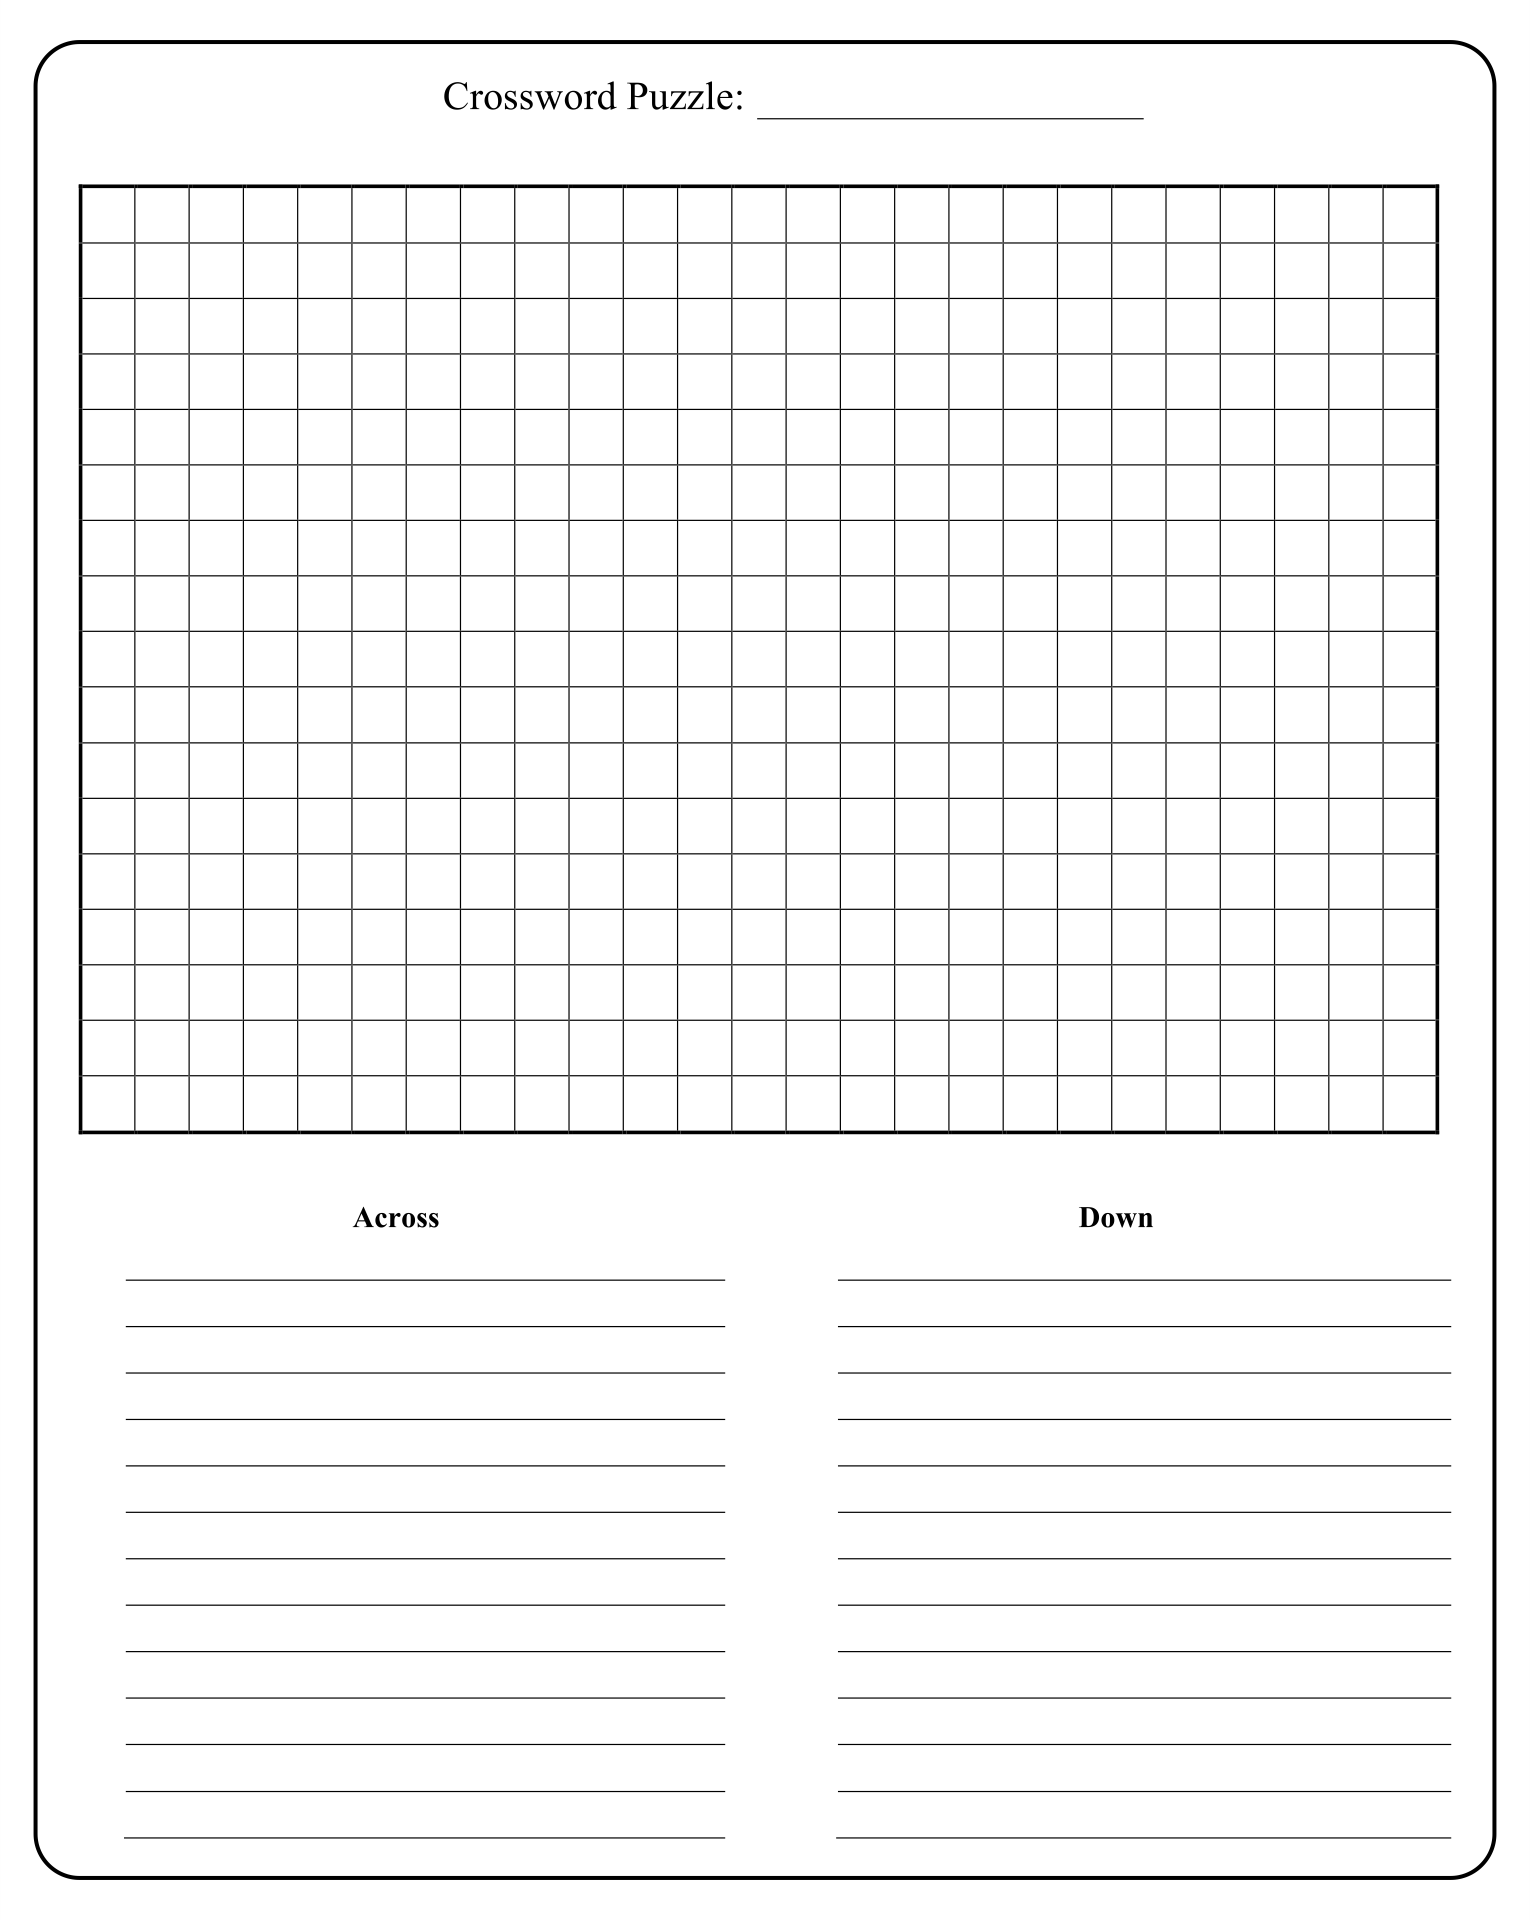 blank-crossword-puzzle-printable-printable-word-searches